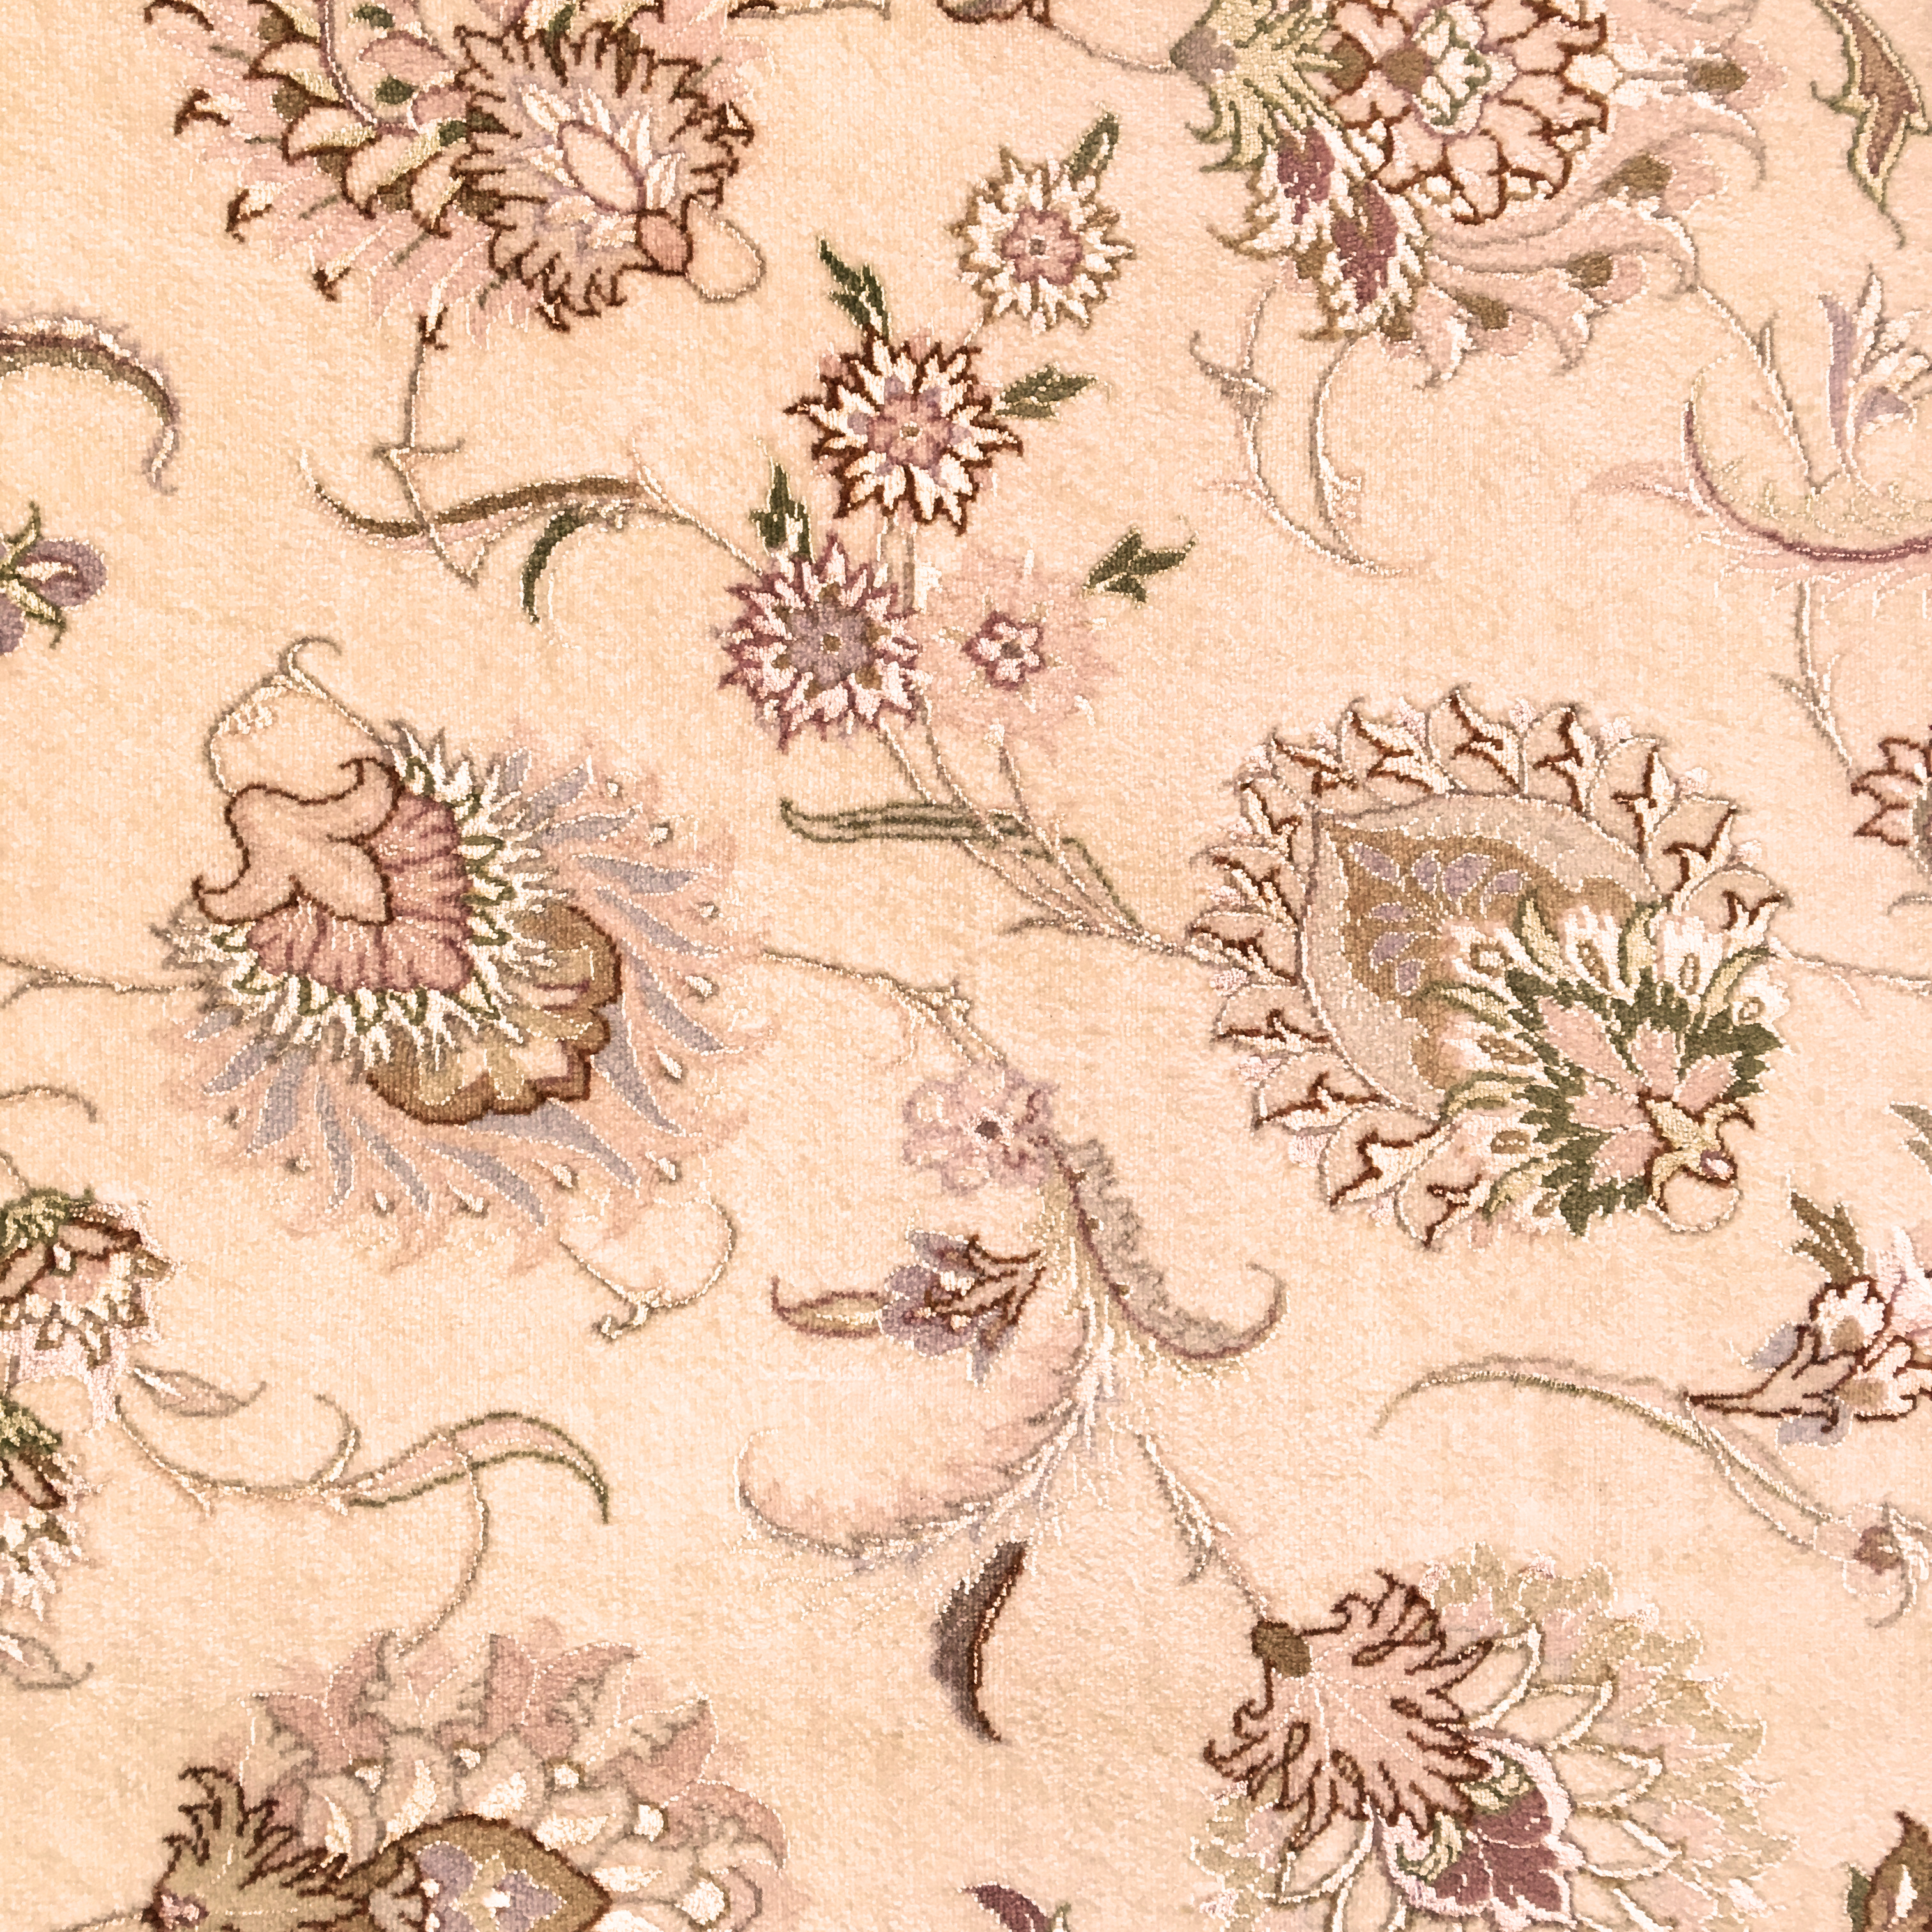 Teppichmuster: Floral